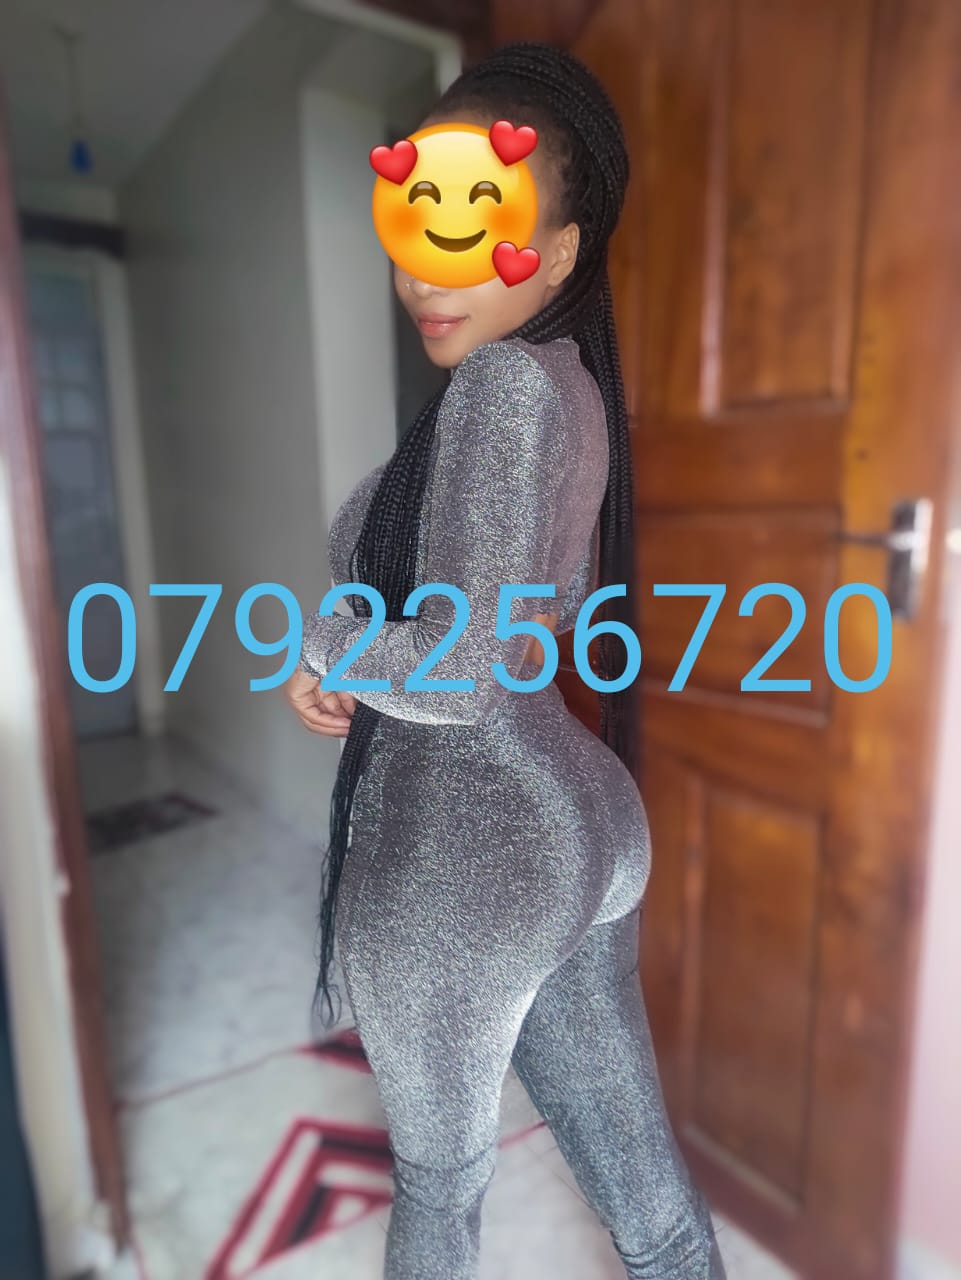 Natasha Hot escort girl in TRM with a round ass.